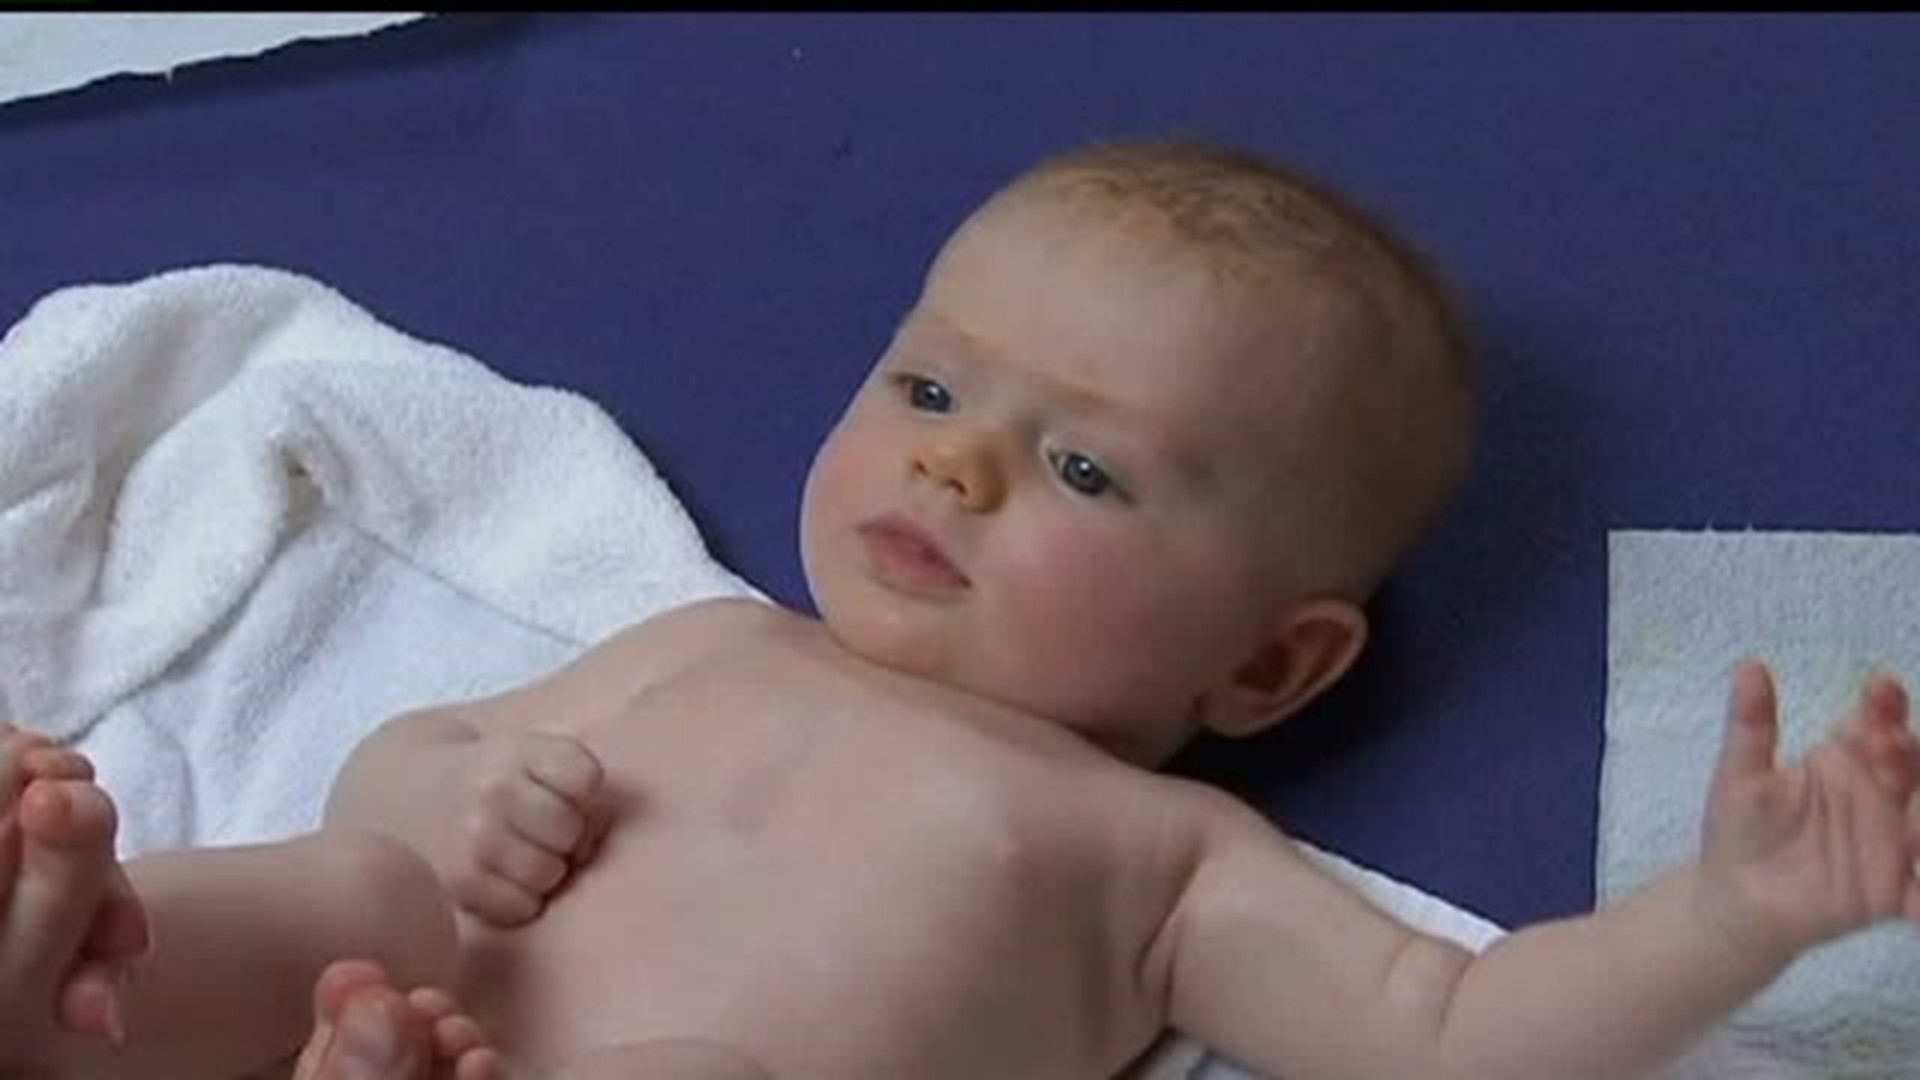 Diaper rash is a common problem for babies, but should not be much worry